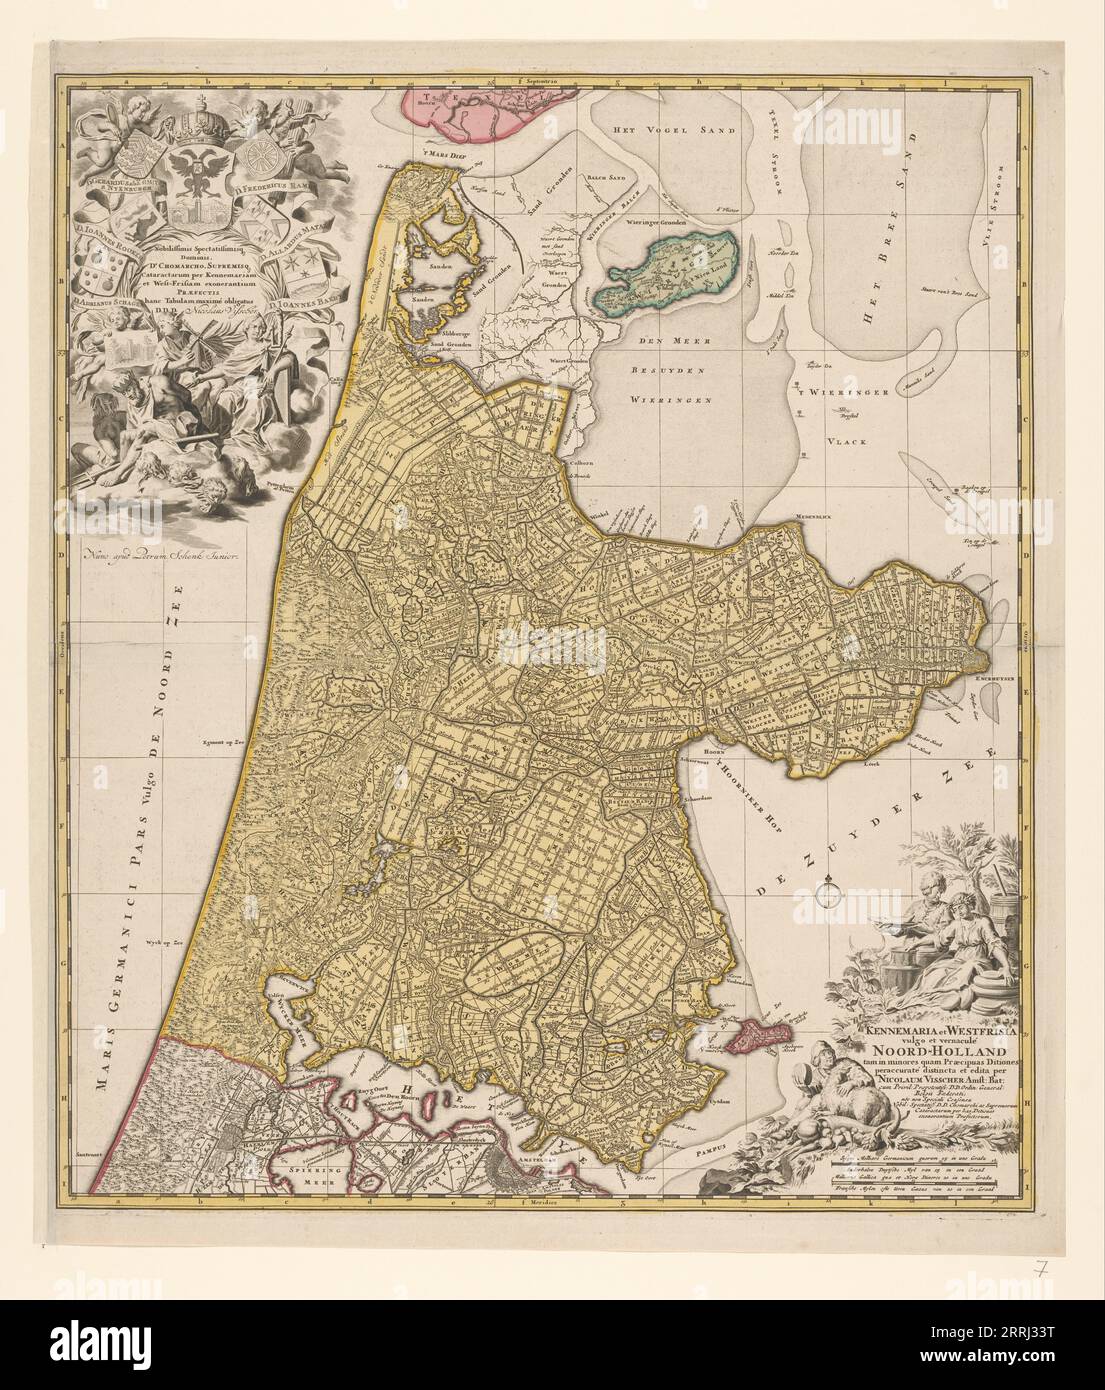 Map of North Holland, c.1700-c.1710. 'Kennemaria et Westfrisia vulgo et vernacul&#xe9; Noord-Holland tam in minores quam Praecipuas Ditiones...'. Showing the southern tip of Texel, Wieringen, Marken and a small section of South Holland. At the bottom right scale in German and French miles (1: 150,000). At the bottom right the title, farmers with cheeses, butter and milk. At top left, dedication and putti with the imperial crown and coat of arms, allegorical figures - one holding a windmill looking at an image of a lock. Stock Photo